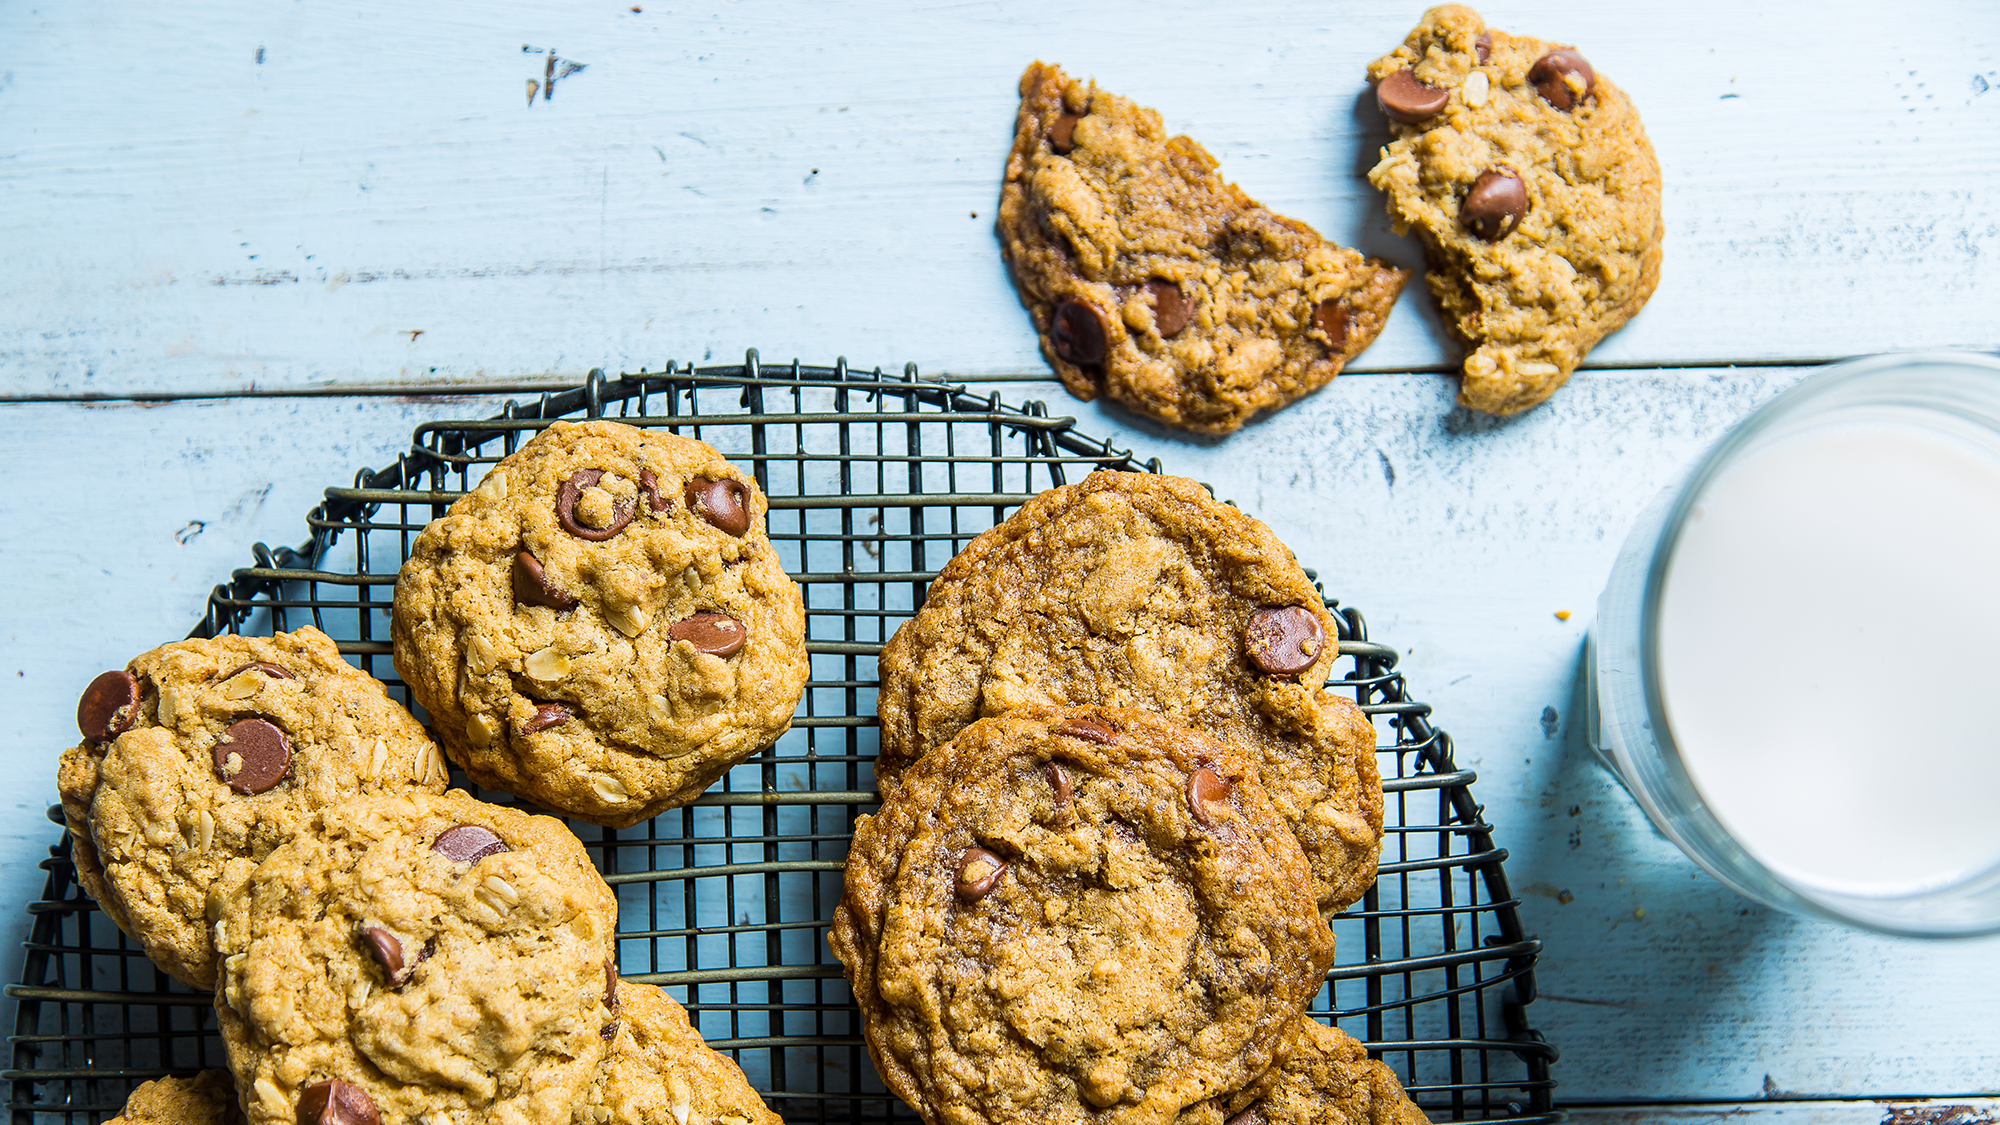 Chewy or Crispy Chocolate Chip Cookies